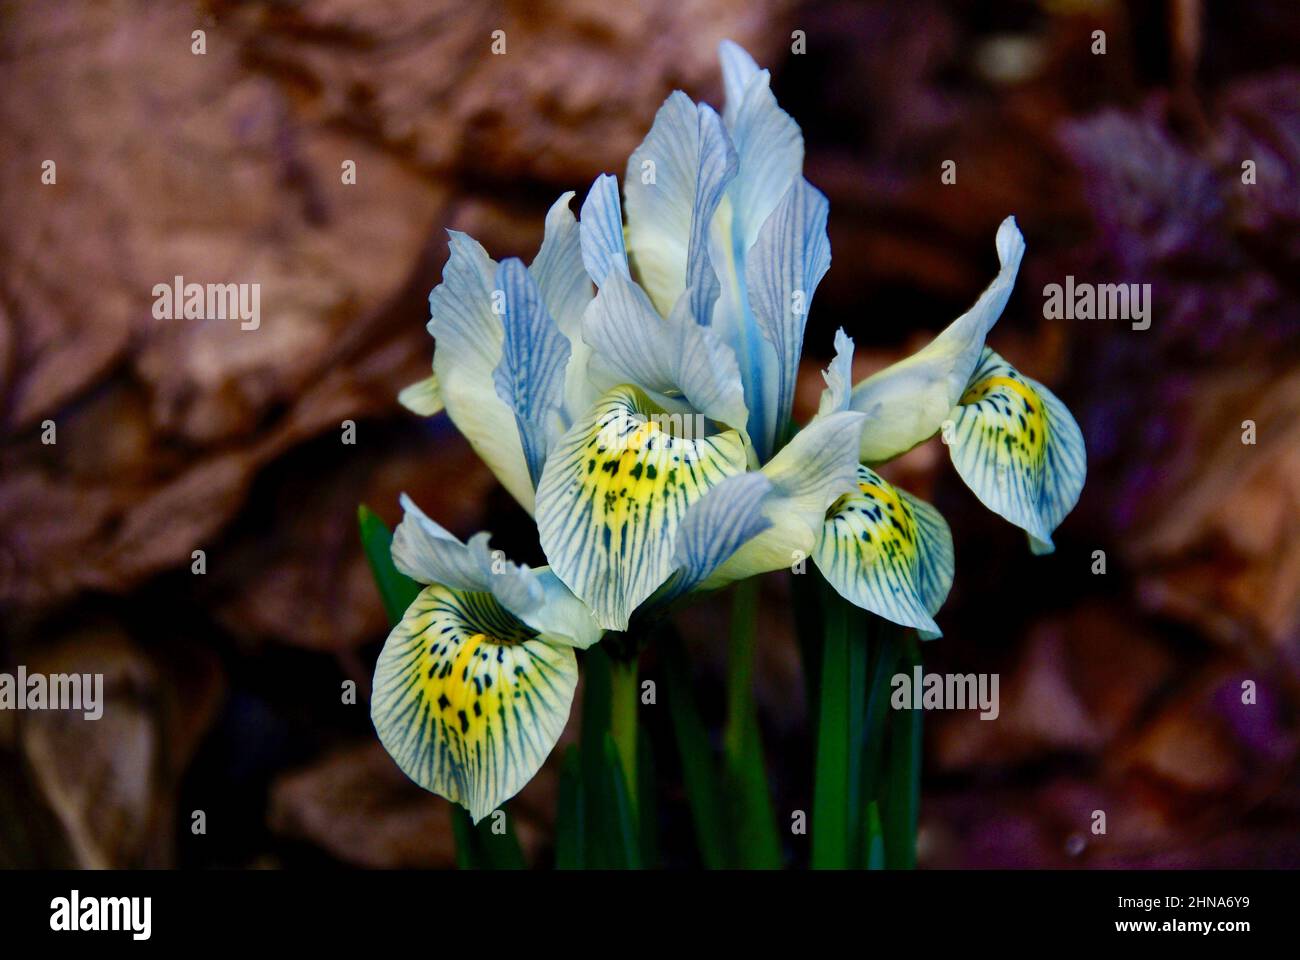 Mottled blue dwarf iris among old brown leaves in early spring. Stock Photo